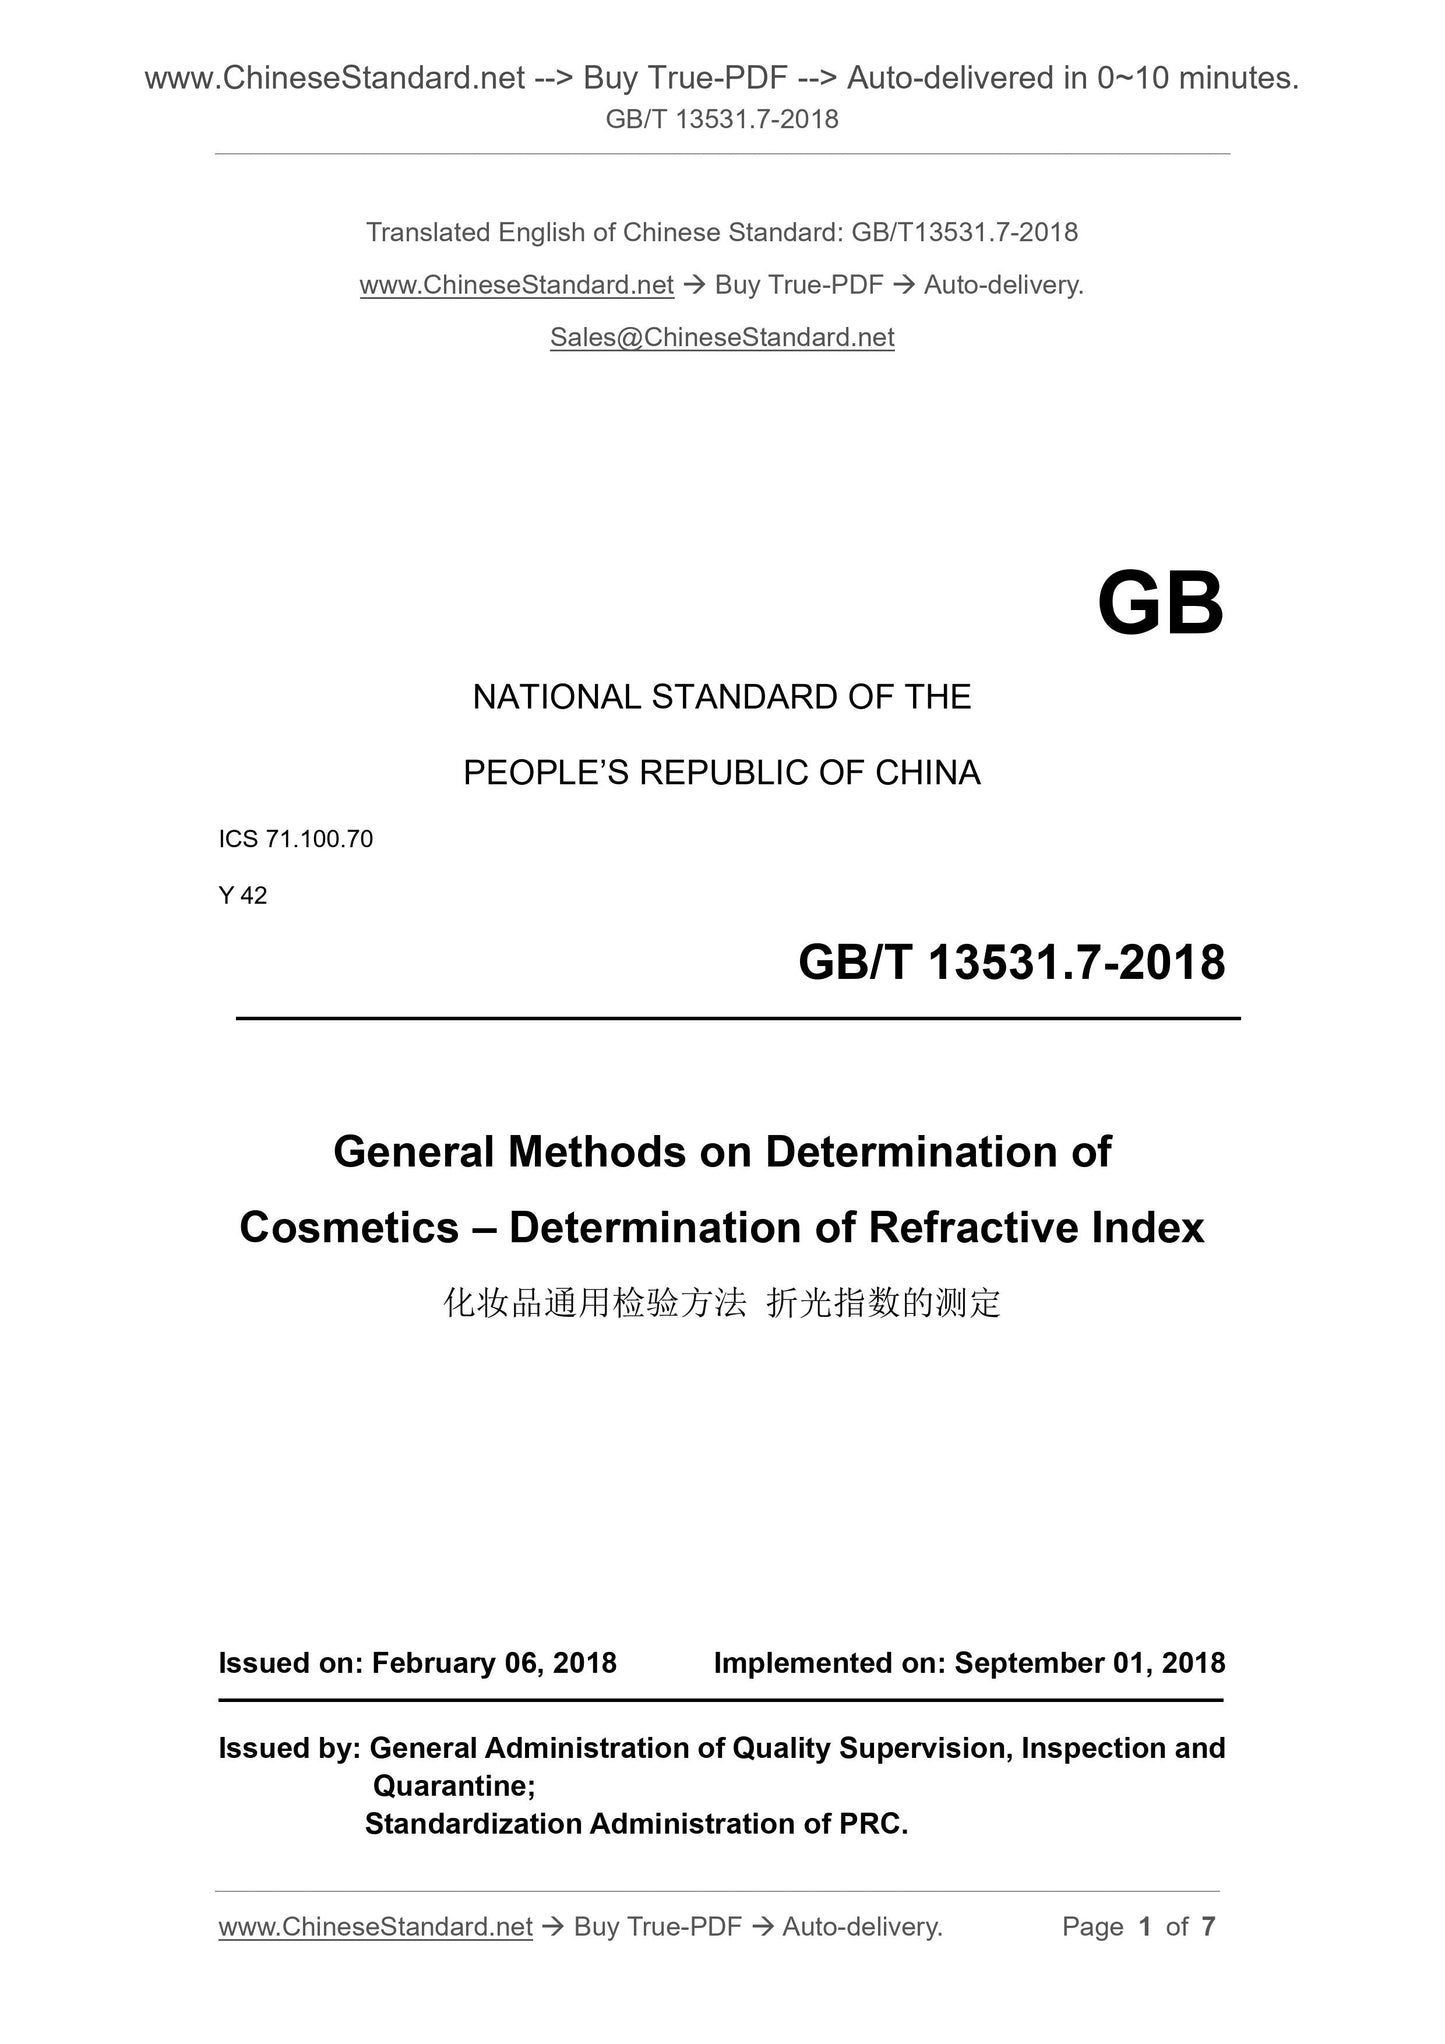 GB/T 13531.7-2018 Page 1